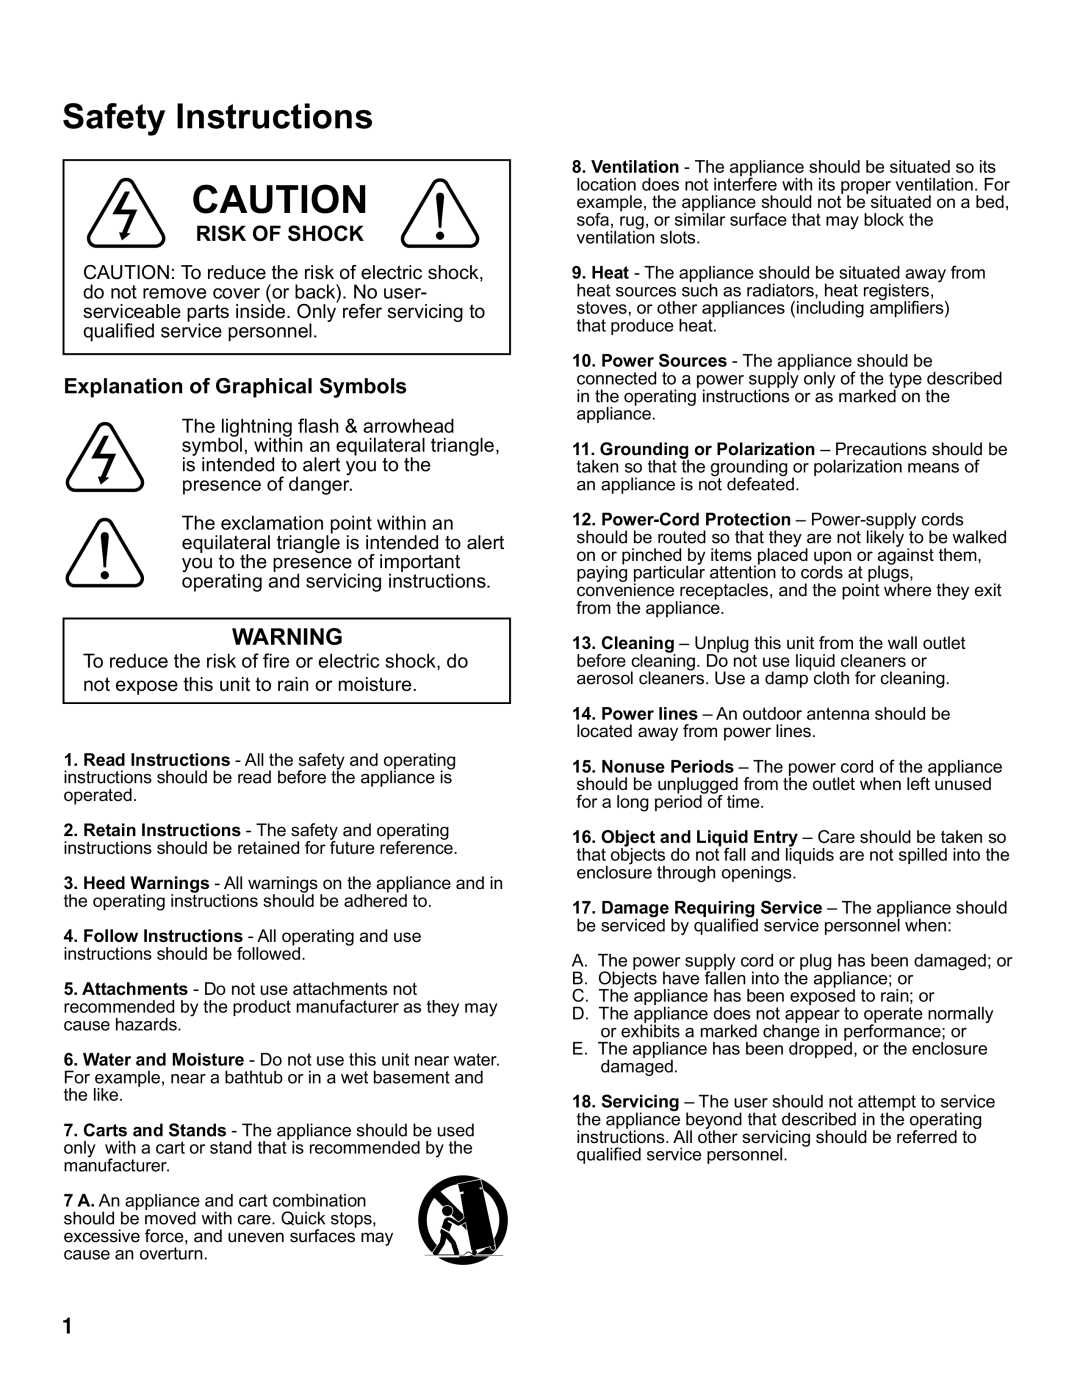 VocoPro SUB-1200 instruction manual Safety Instructions, Risk Of Shock, Explanation of Graphical Symbols 